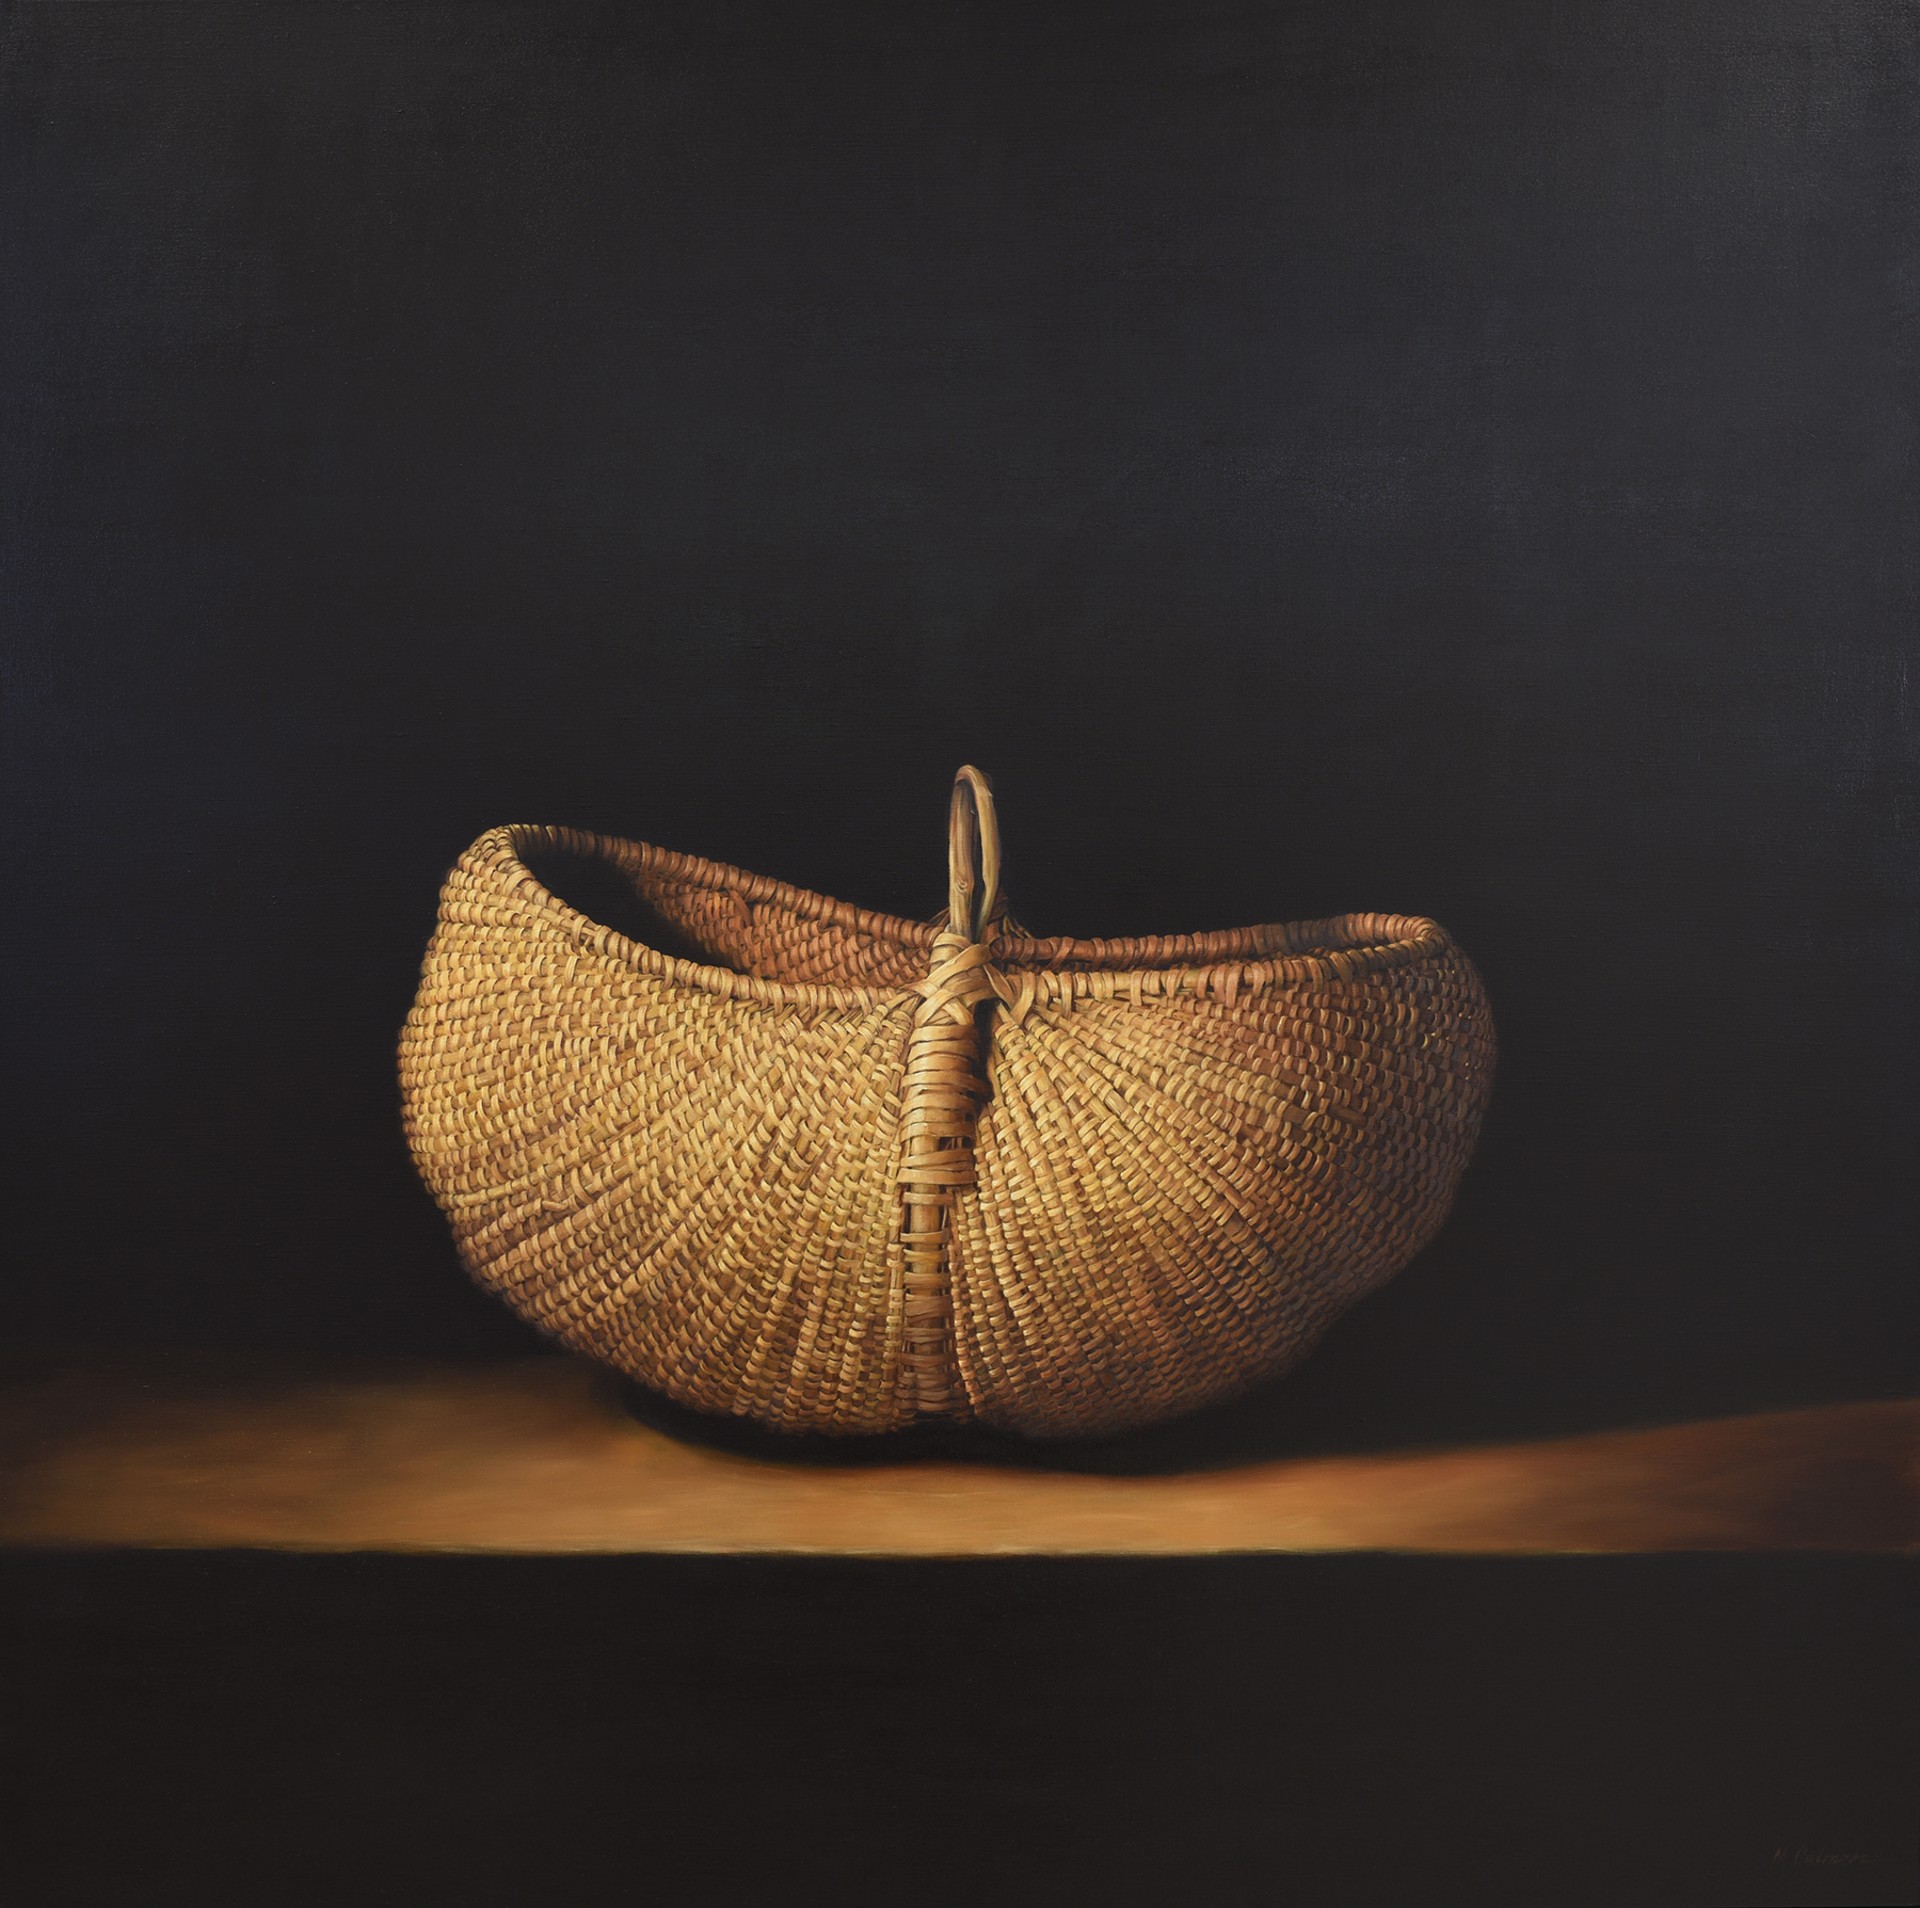 The Egg Basket by Mary Calengor